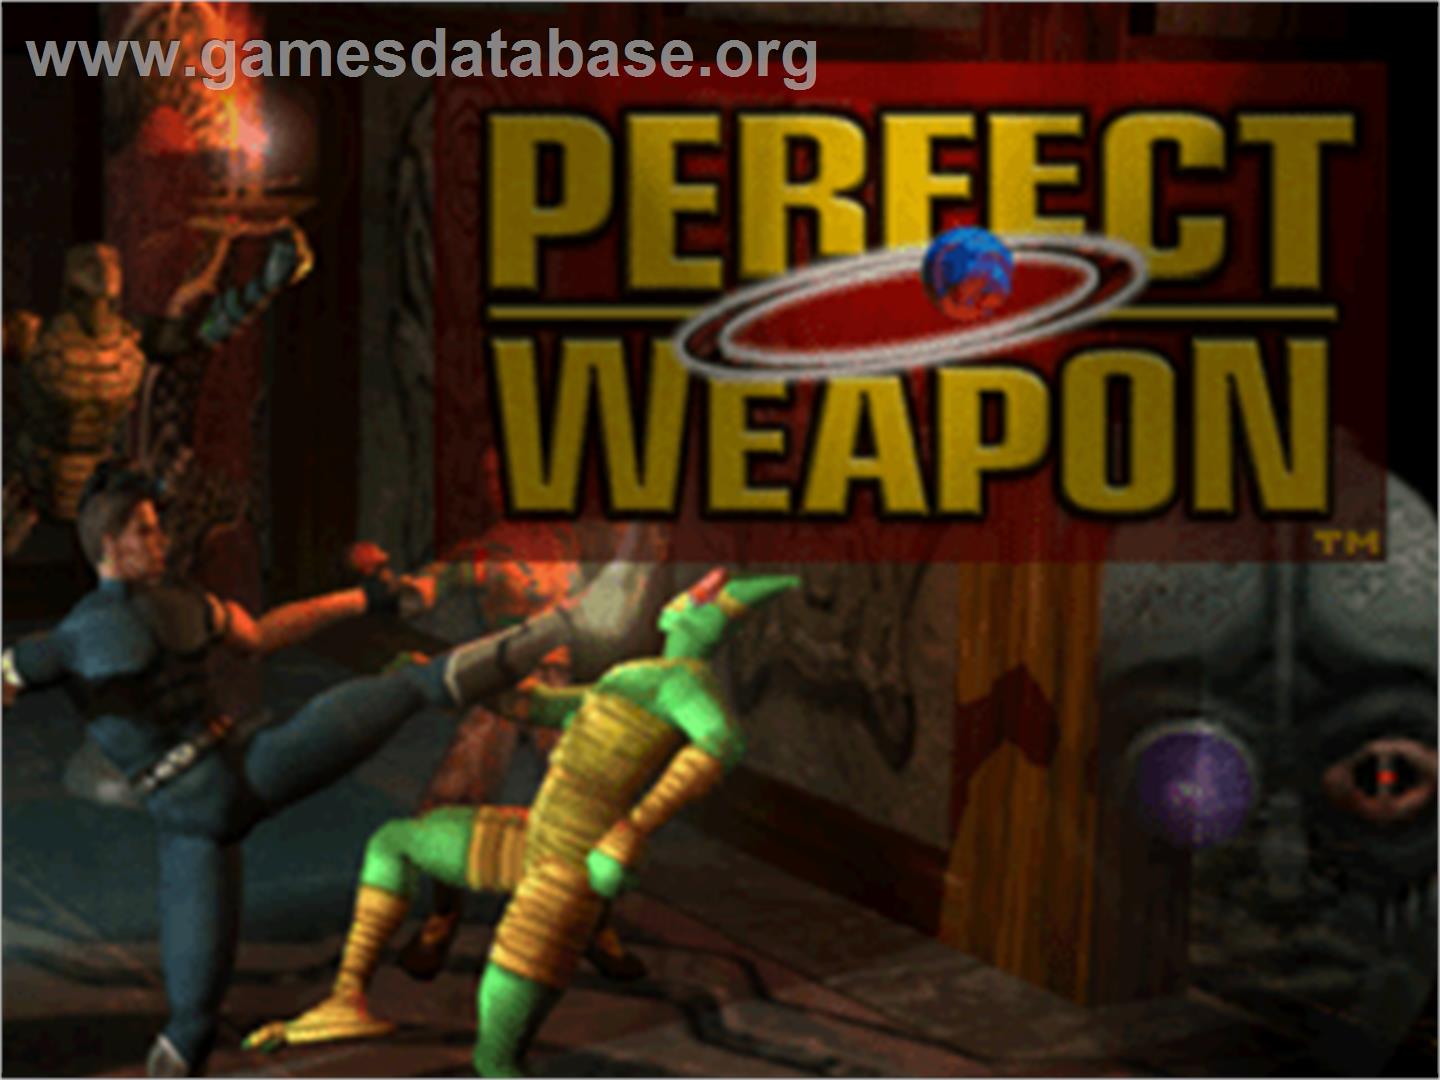 Perfect Weapon - Sony Playstation - Artwork - Title Screen